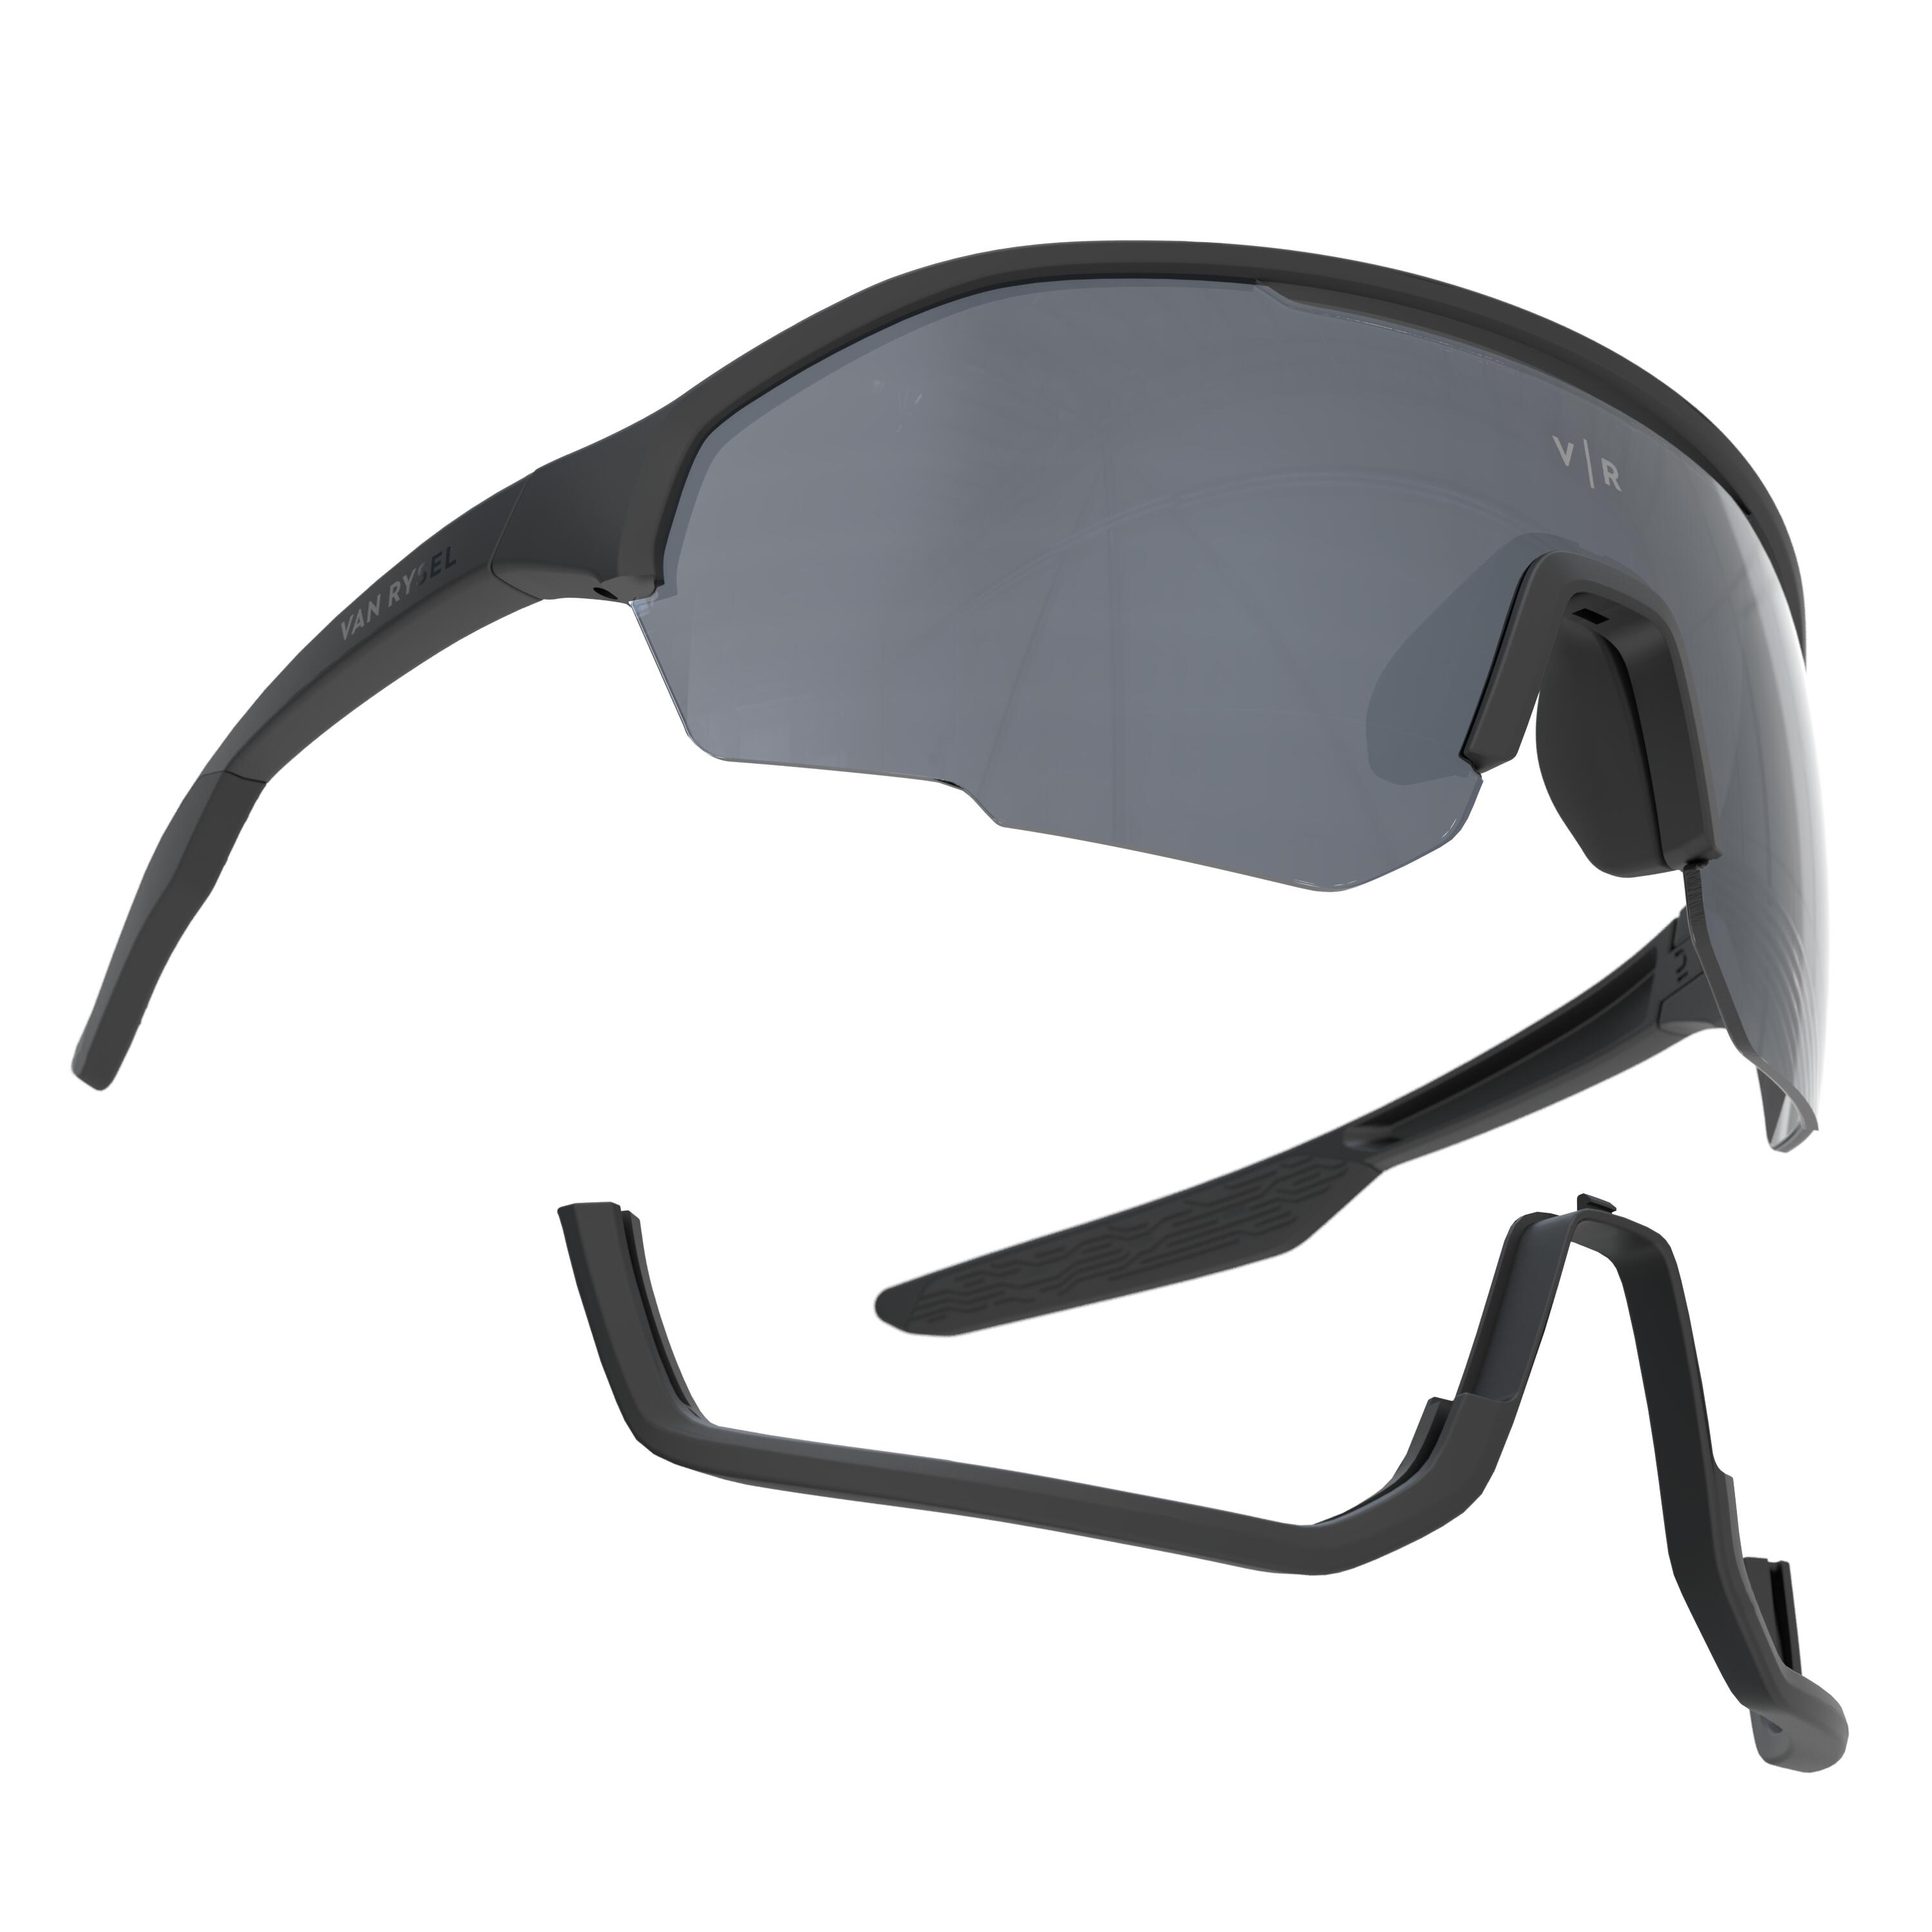 Adult Category 3 Cycling Sunglasses Perf 500 - Black 5/7